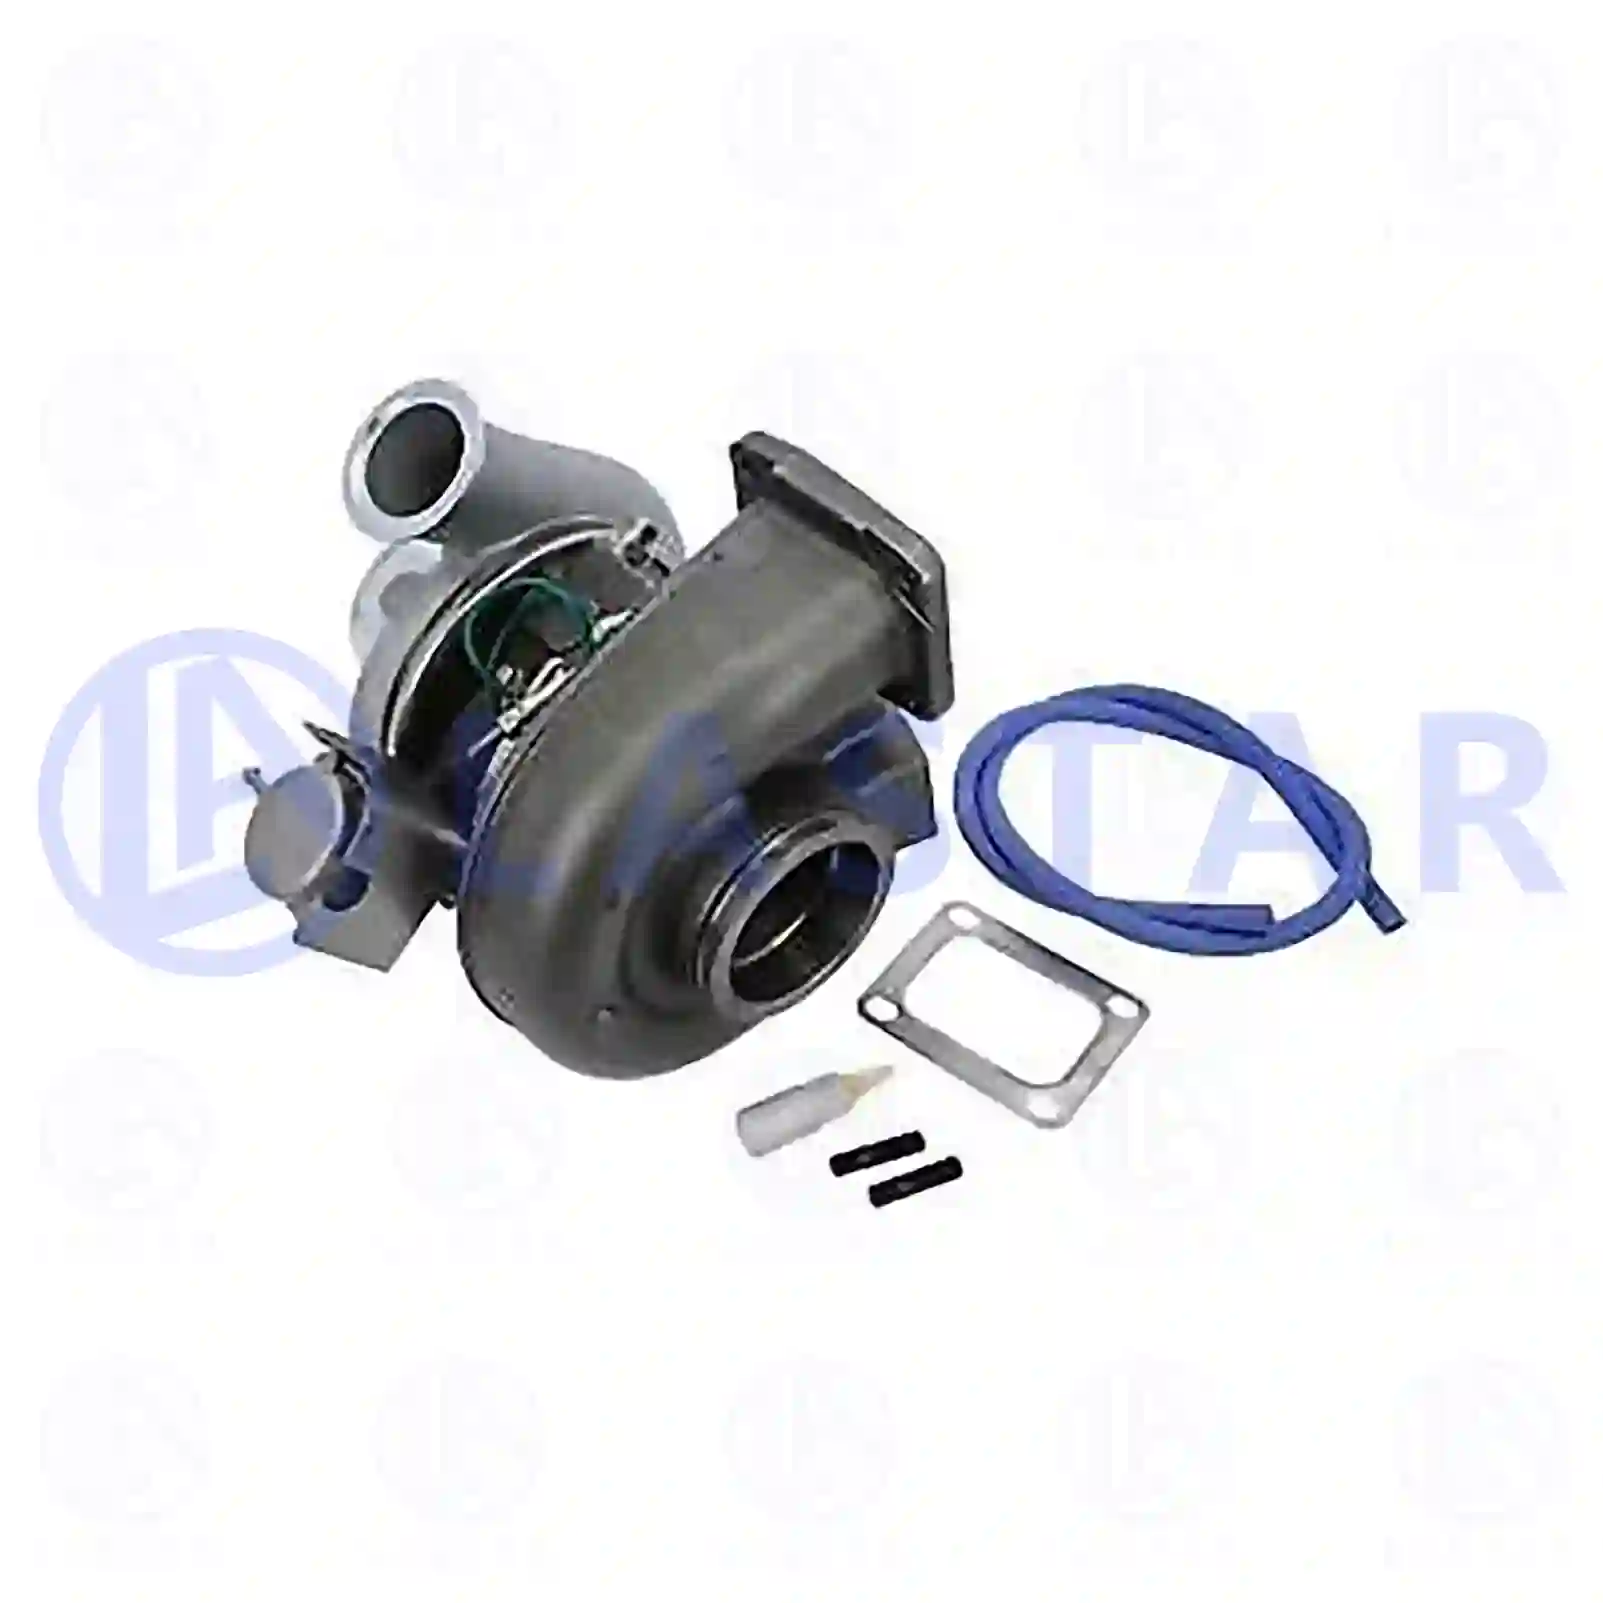 Turbocharger, with gasket kit, 77700473, 02996386, 504139767, 504182773, 504269280, 504269281 ||  77700473 Lastar Spare Part | Truck Spare Parts, Auotomotive Spare Parts Turbocharger, with gasket kit, 77700473, 02996386, 504139767, 504182773, 504269280, 504269281 ||  77700473 Lastar Spare Part | Truck Spare Parts, Auotomotive Spare Parts